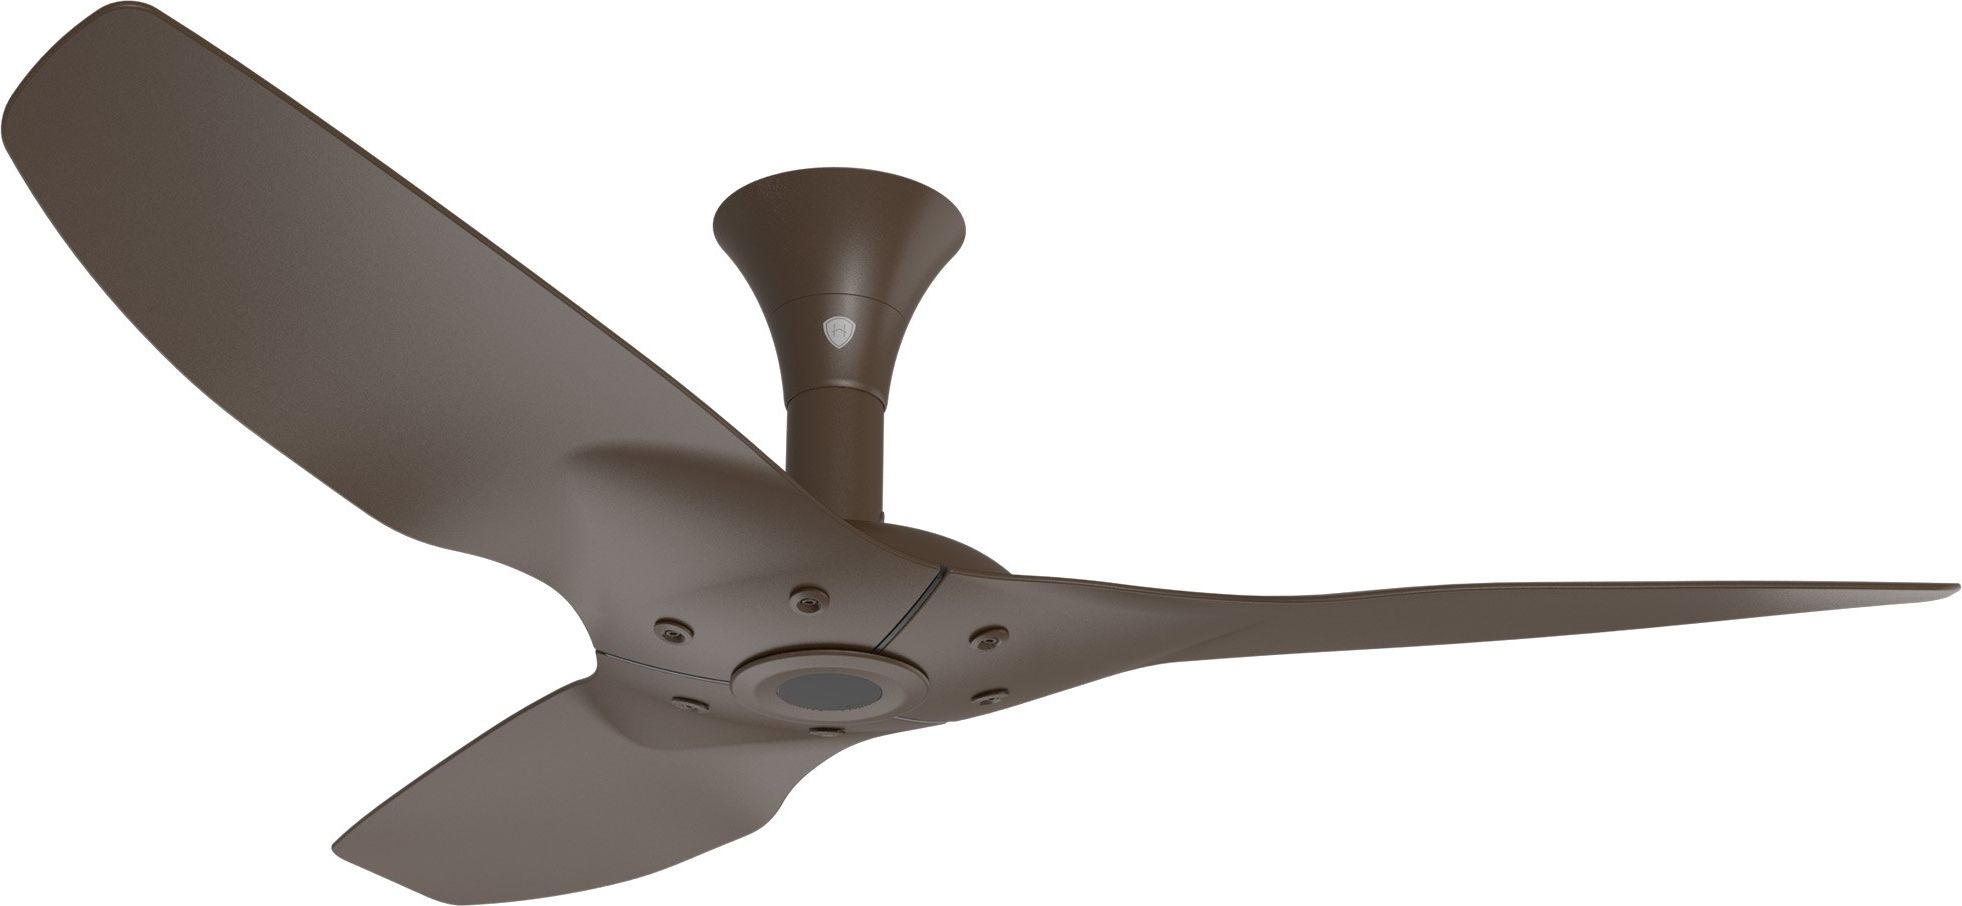 Well Known Bronze Outdoor Ceiling Fans Regarding Haiku Outdoor Ceiling Fan: 52", Oil Rubbed Bronze Full Appearance (View 10 of 20)